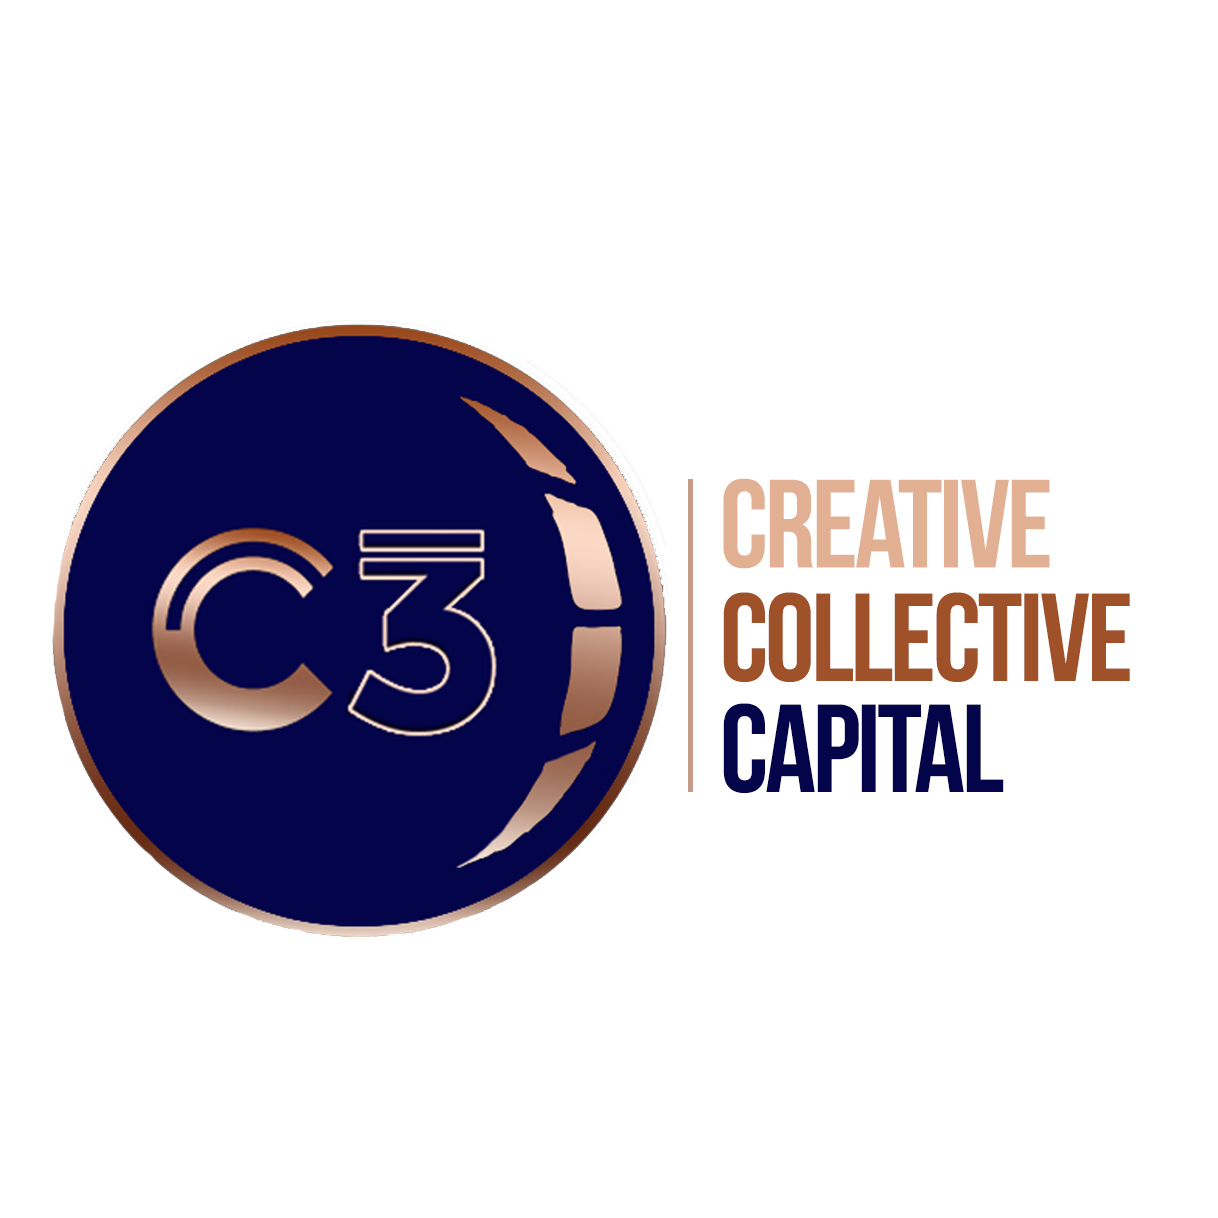 Rob Hardy, Winston D Johnson, Whit Blakeley and Greg “Beef” Jones to Speak on Panel at C3’s 2nd Annual Sound and Screen Finance Forum